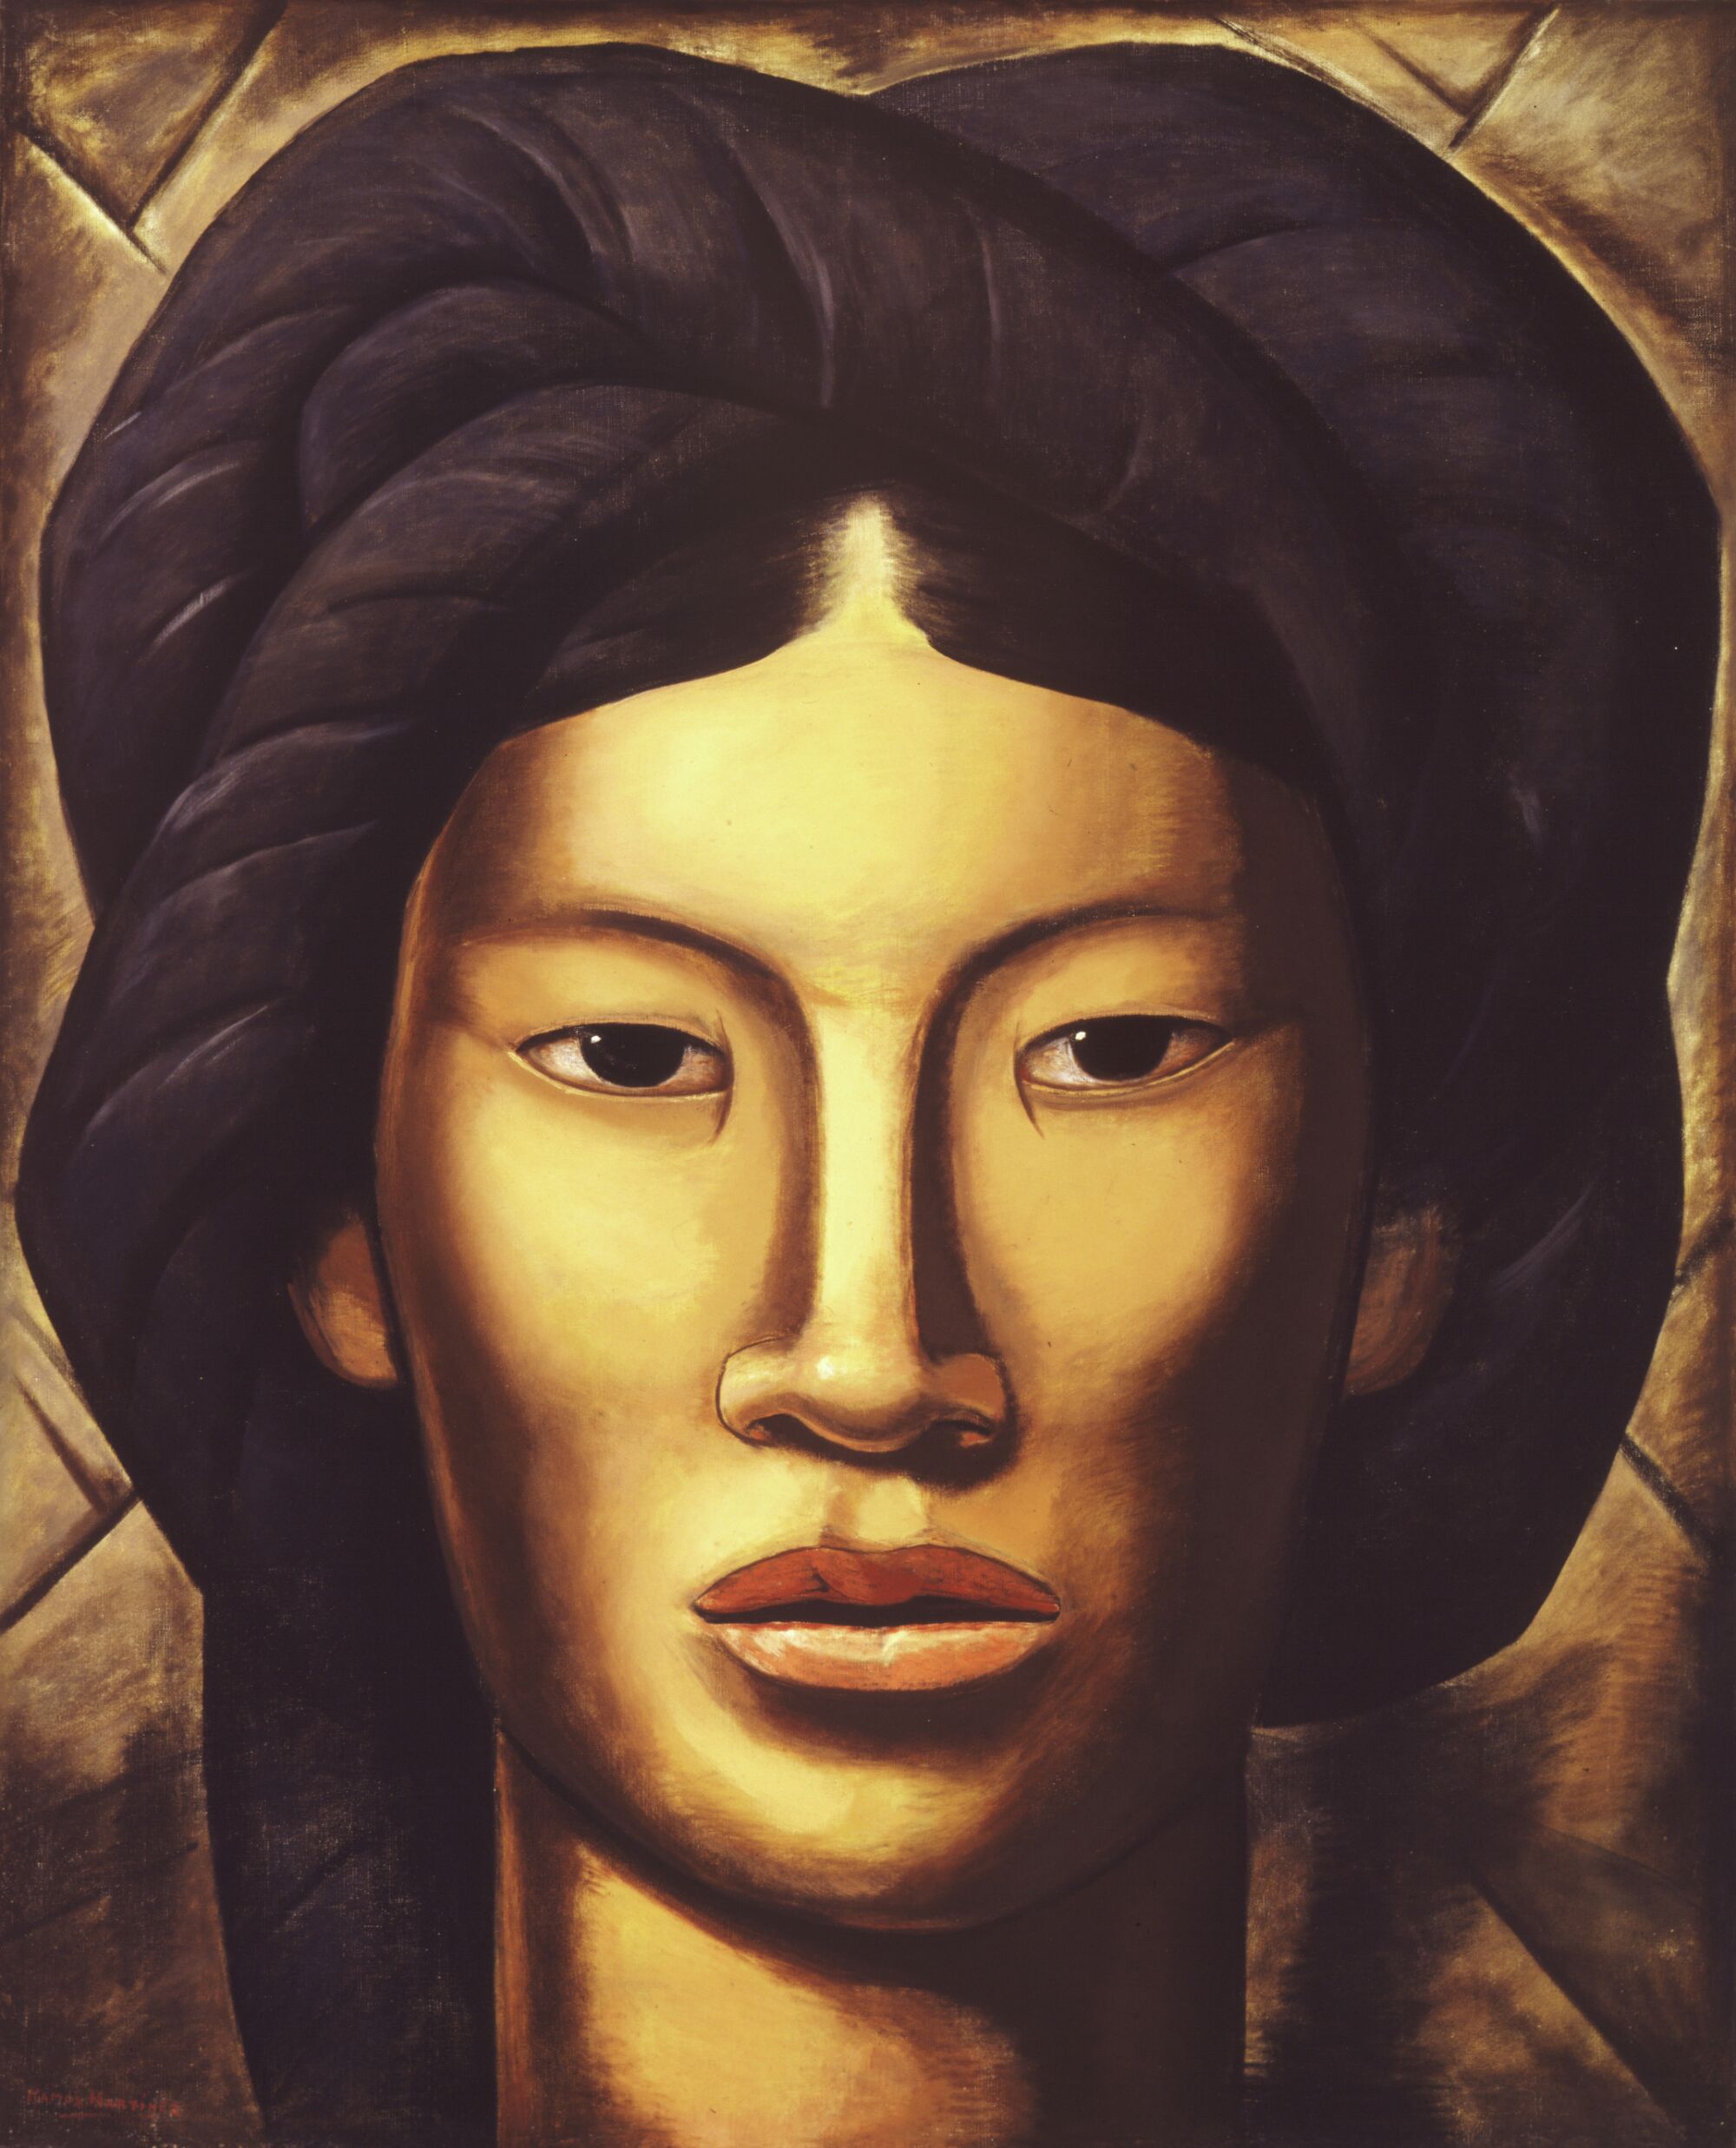 An earth-toned painting shows a taciturn young Indigenous girl resolutely meeting the viewer's gaze